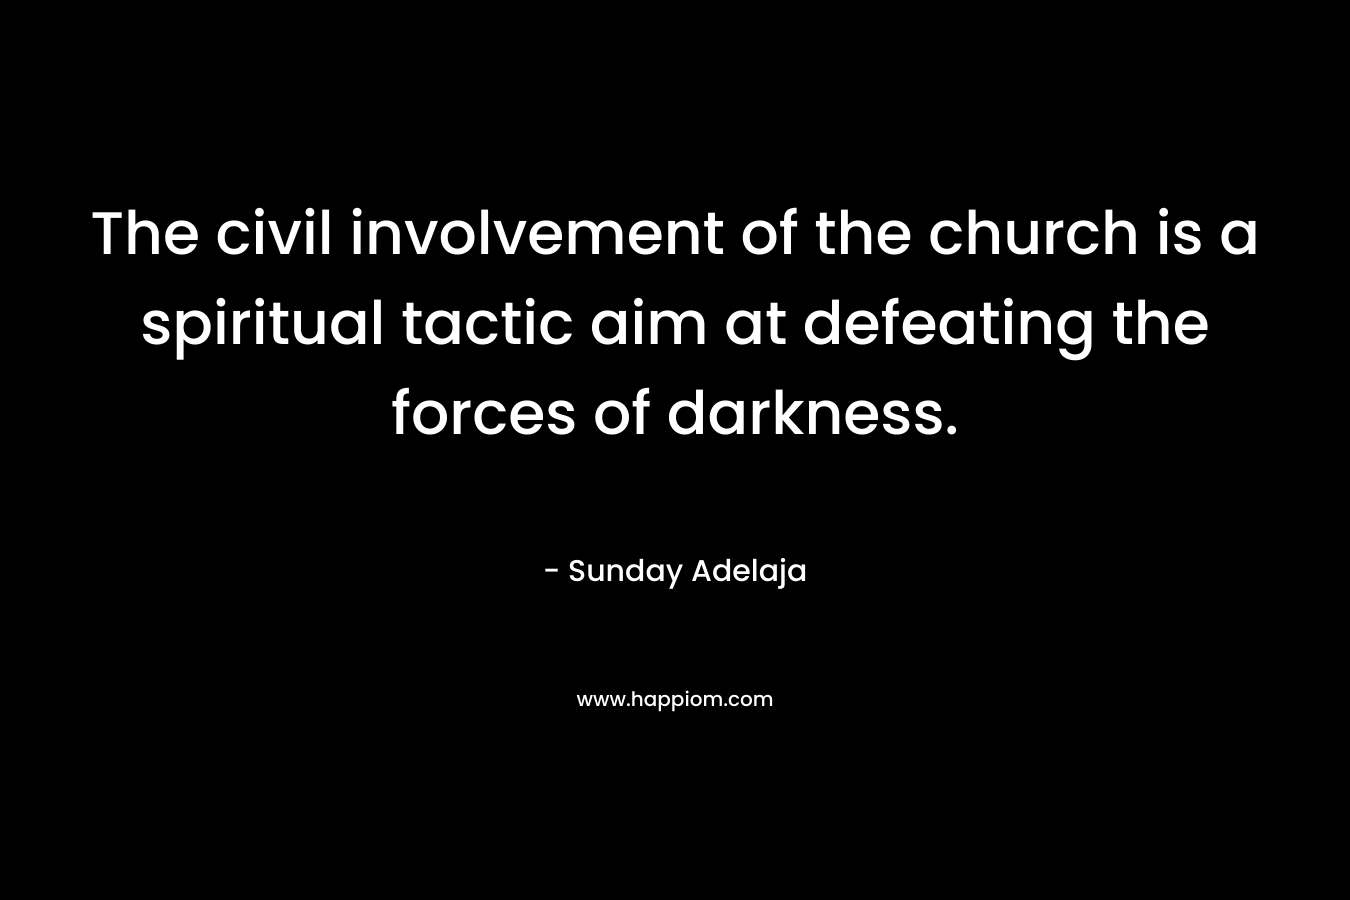 The civil involvement of the church is a spiritual tactic aim at defeating the forces of darkness.